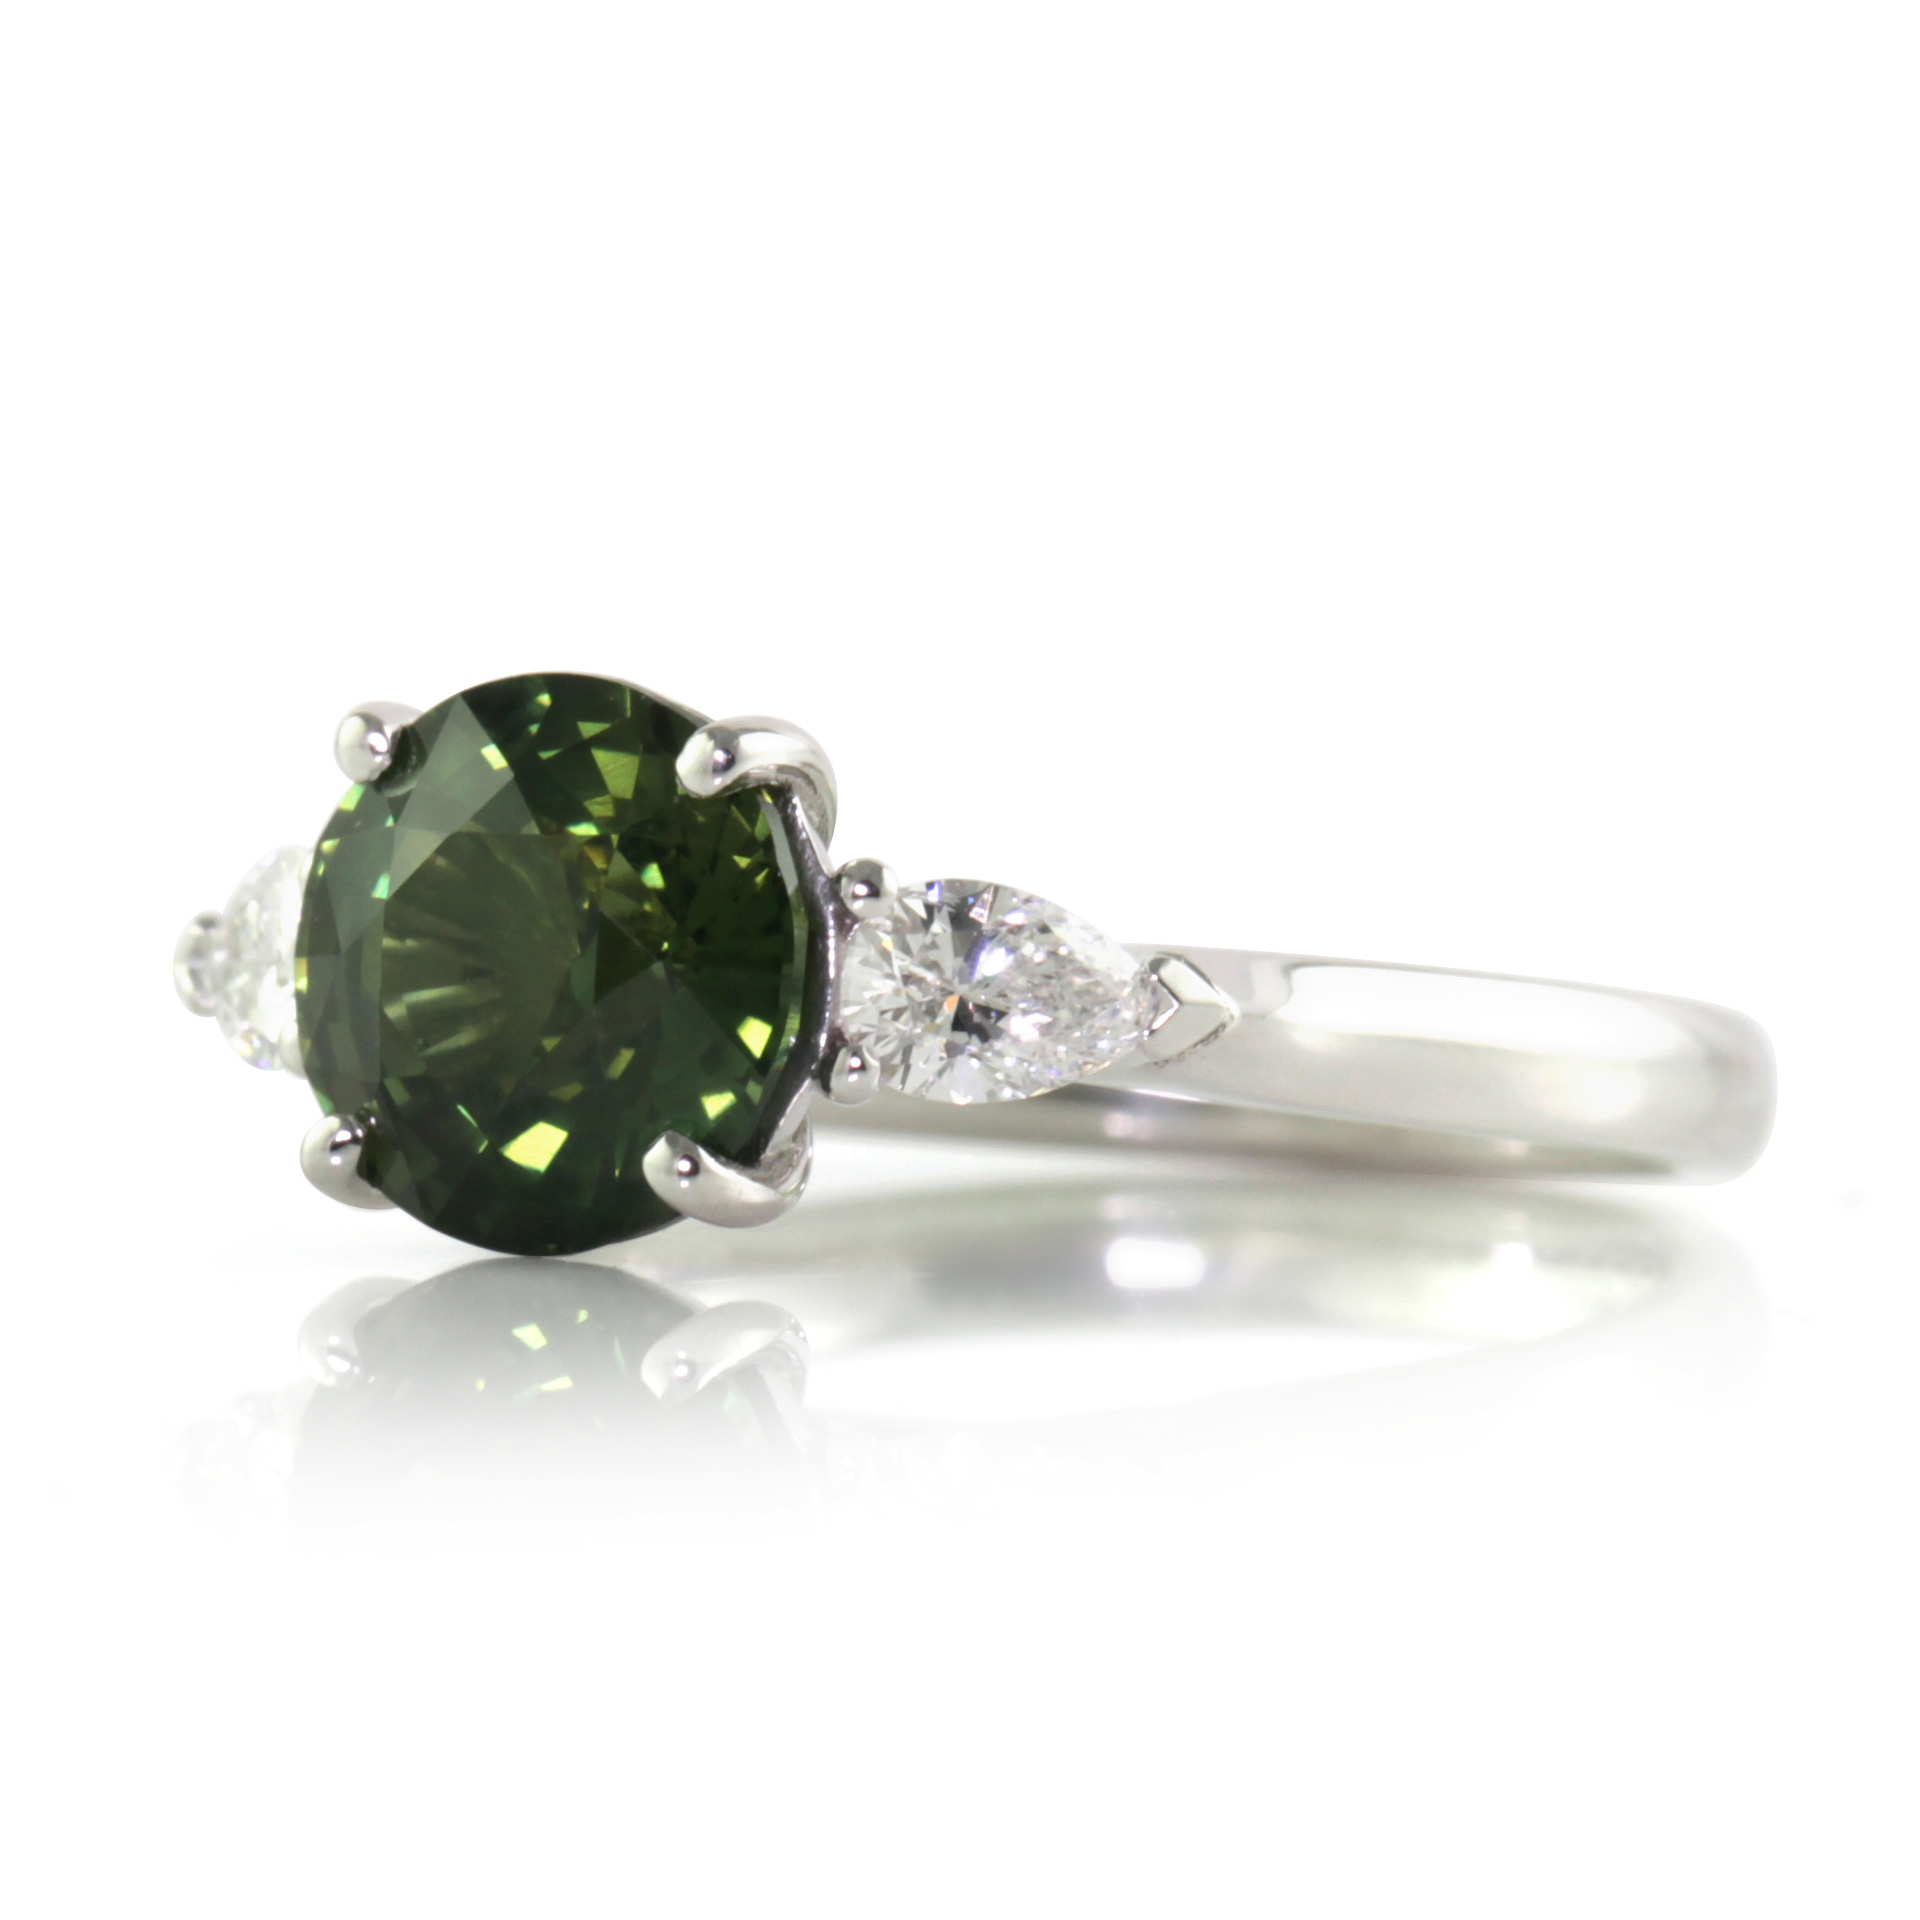 2.51ct-forest-green-round-sapphire-ring-bentley-de-lisle-jewellers